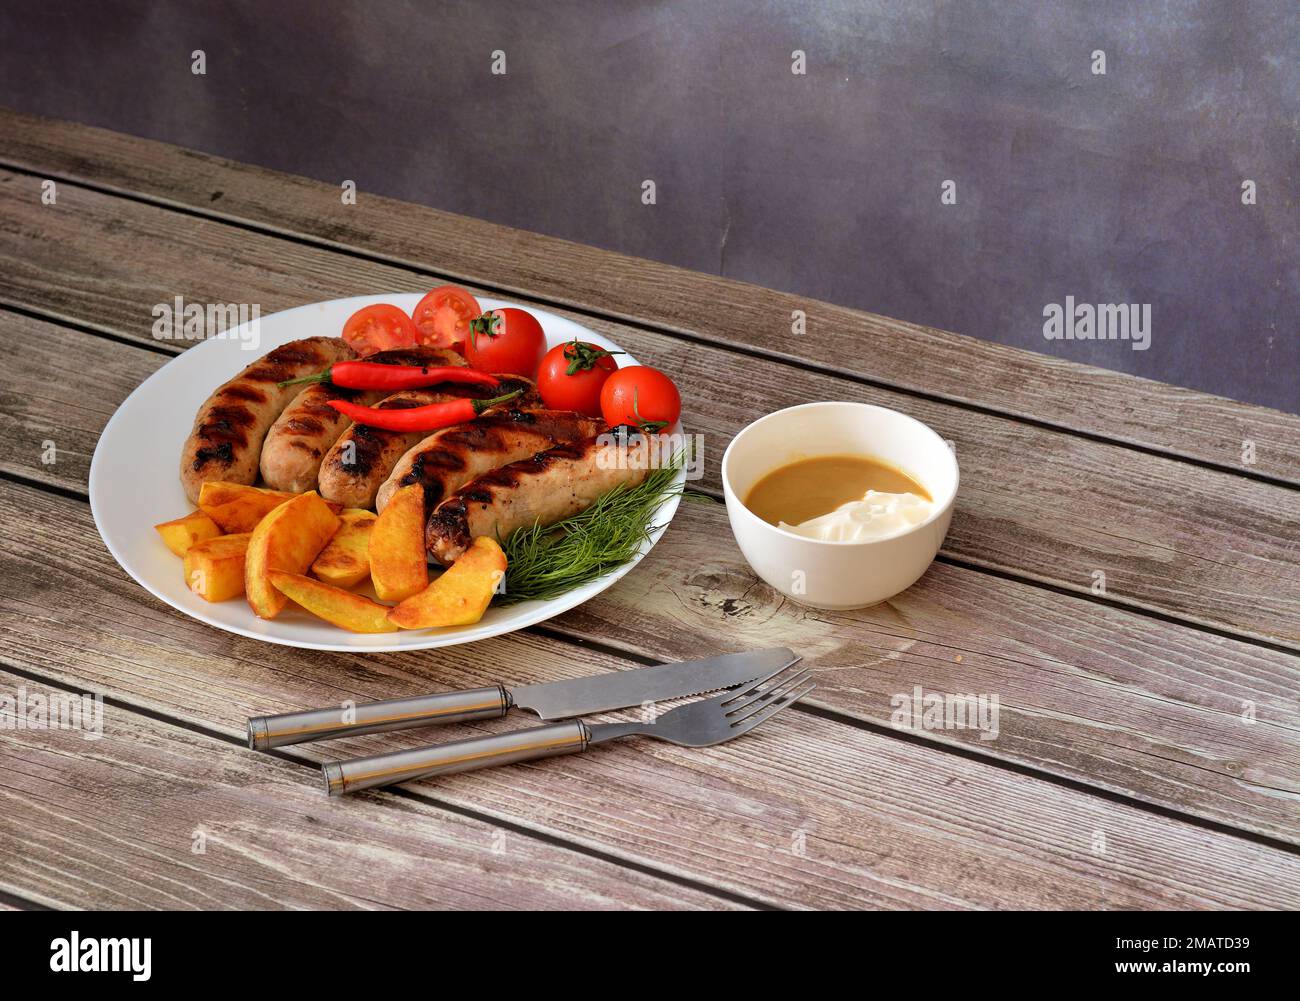 A plate with several grilled sausages, cherry tomatoes, hot peppers, fried potatoes and herbs on a wooden table, next to a cup with sauce and cutlery. Stock Photo